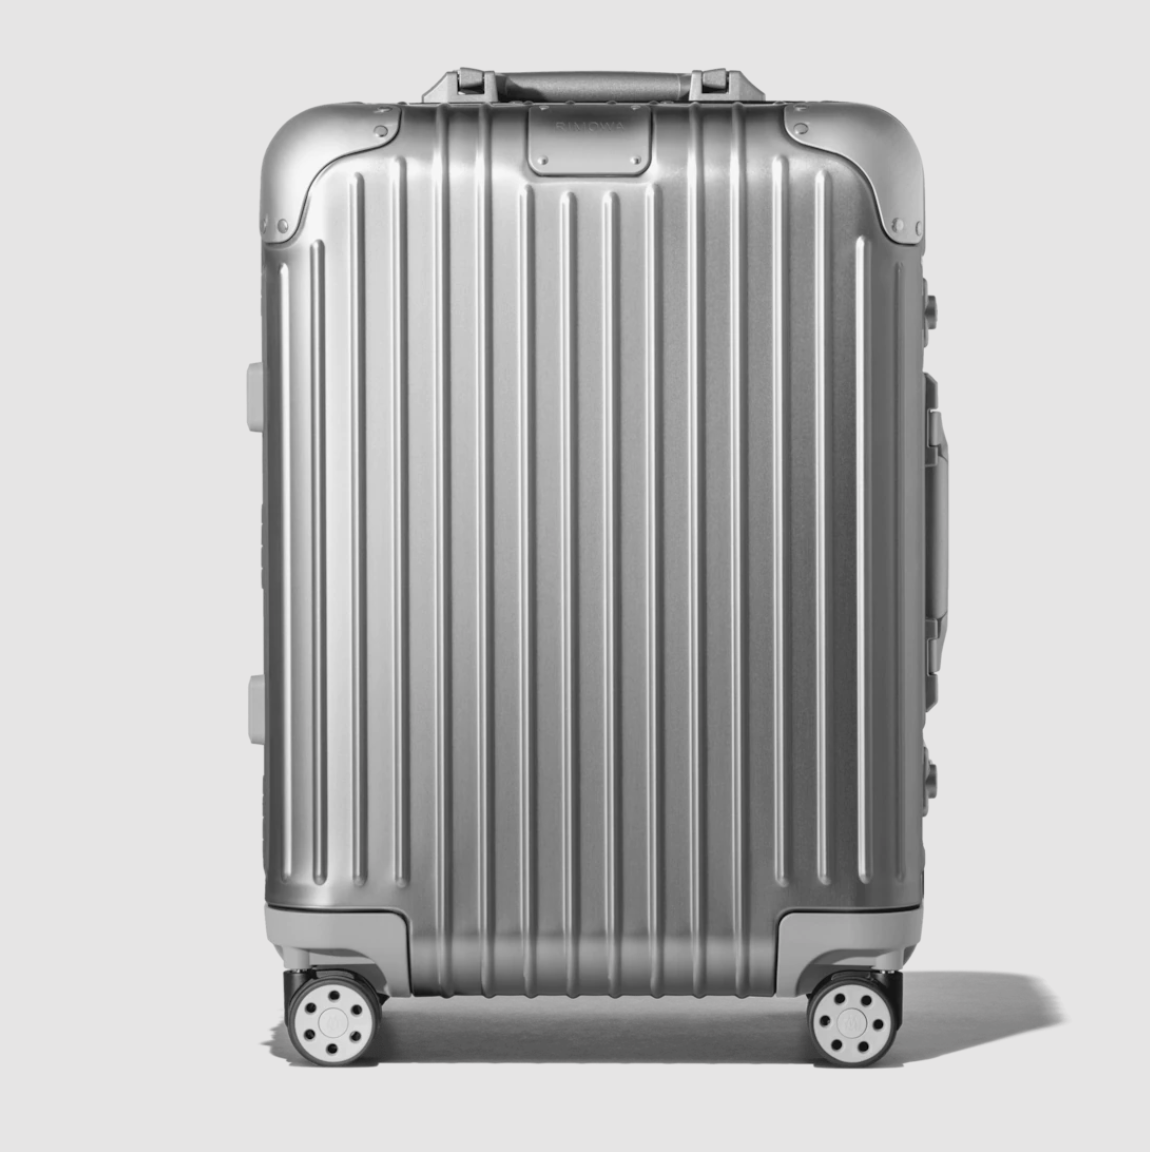 <p><strong>$1525.00</strong></p><p><a href="https://go.redirectingat.com?id=74968X1553576&url=https%3A%2F%2Fwww.rimowa.com%2Fus%2Fen%2Fall-luggage%2F&sref=https%3A%2F%2Fwww.esquire.com%2Flifestyle%2Fg60042947%2Fbest-luggage-sets%2F">Shop Now</a></p><p>Meet the trailblazer of the suitcase world: Rimowa's Essential collection. Born in Germany, this lineup is the brainchild of high-tech dreams, combining strength, durability, and a featherlight touch. Whether you're grabbing the Cabin, Check-In M, or Check-In L, you're not just picking luggage; you're choosing a travel revolution. </p><p><a href="https://go.redirectingat.com?id=74968X1553576&url=https%3A%2F%2Fwww.rimowa.com%2Fus%2Fen%2Fluggage%2Fcolour%2Fblue%2Fcabin%2F83253741.html&sref=https%3A%2F%2Fwww.esquire.com%2Flifestyle%2Fg60042947%2Fbest-luggage-sets%2F">Rimowa's Essential Case Collection</a> gives you the best high-performance polycarbonate, but <a href="https://www.esquire.com/lifestyle/a42659320/rimowa-carryon-suitcase-review/">we will always advocate for the classic aluminum Rimowa suitcase</a>. Choose from three sleek carry-on options or a single check-in size, each available in a handful of colors. For the tech-savvy jet-setter, the Essential Sleeve carry-on is your go-to, doubling as a compact overnight bag for those quick escapes.</p><p>Rimowa doesn't have any bundle buy option on the website, but <a href="https://go.redirectingat.com?id=74968X1553576&url=https%3A%2F%2Fwww.bloomingdales.com%2Fshop%2Fproduct%2Frimowa-essential-collection%3FID%3D3185824%26CategoryID%3D1005594&sref=https%3A%2F%2Fwww.esquire.com%2Flifestyle%2Fg60042947%2Fbest-luggage-sets%2F">Bloomingdale's does</a>, if you prefer to buy that way.</p>